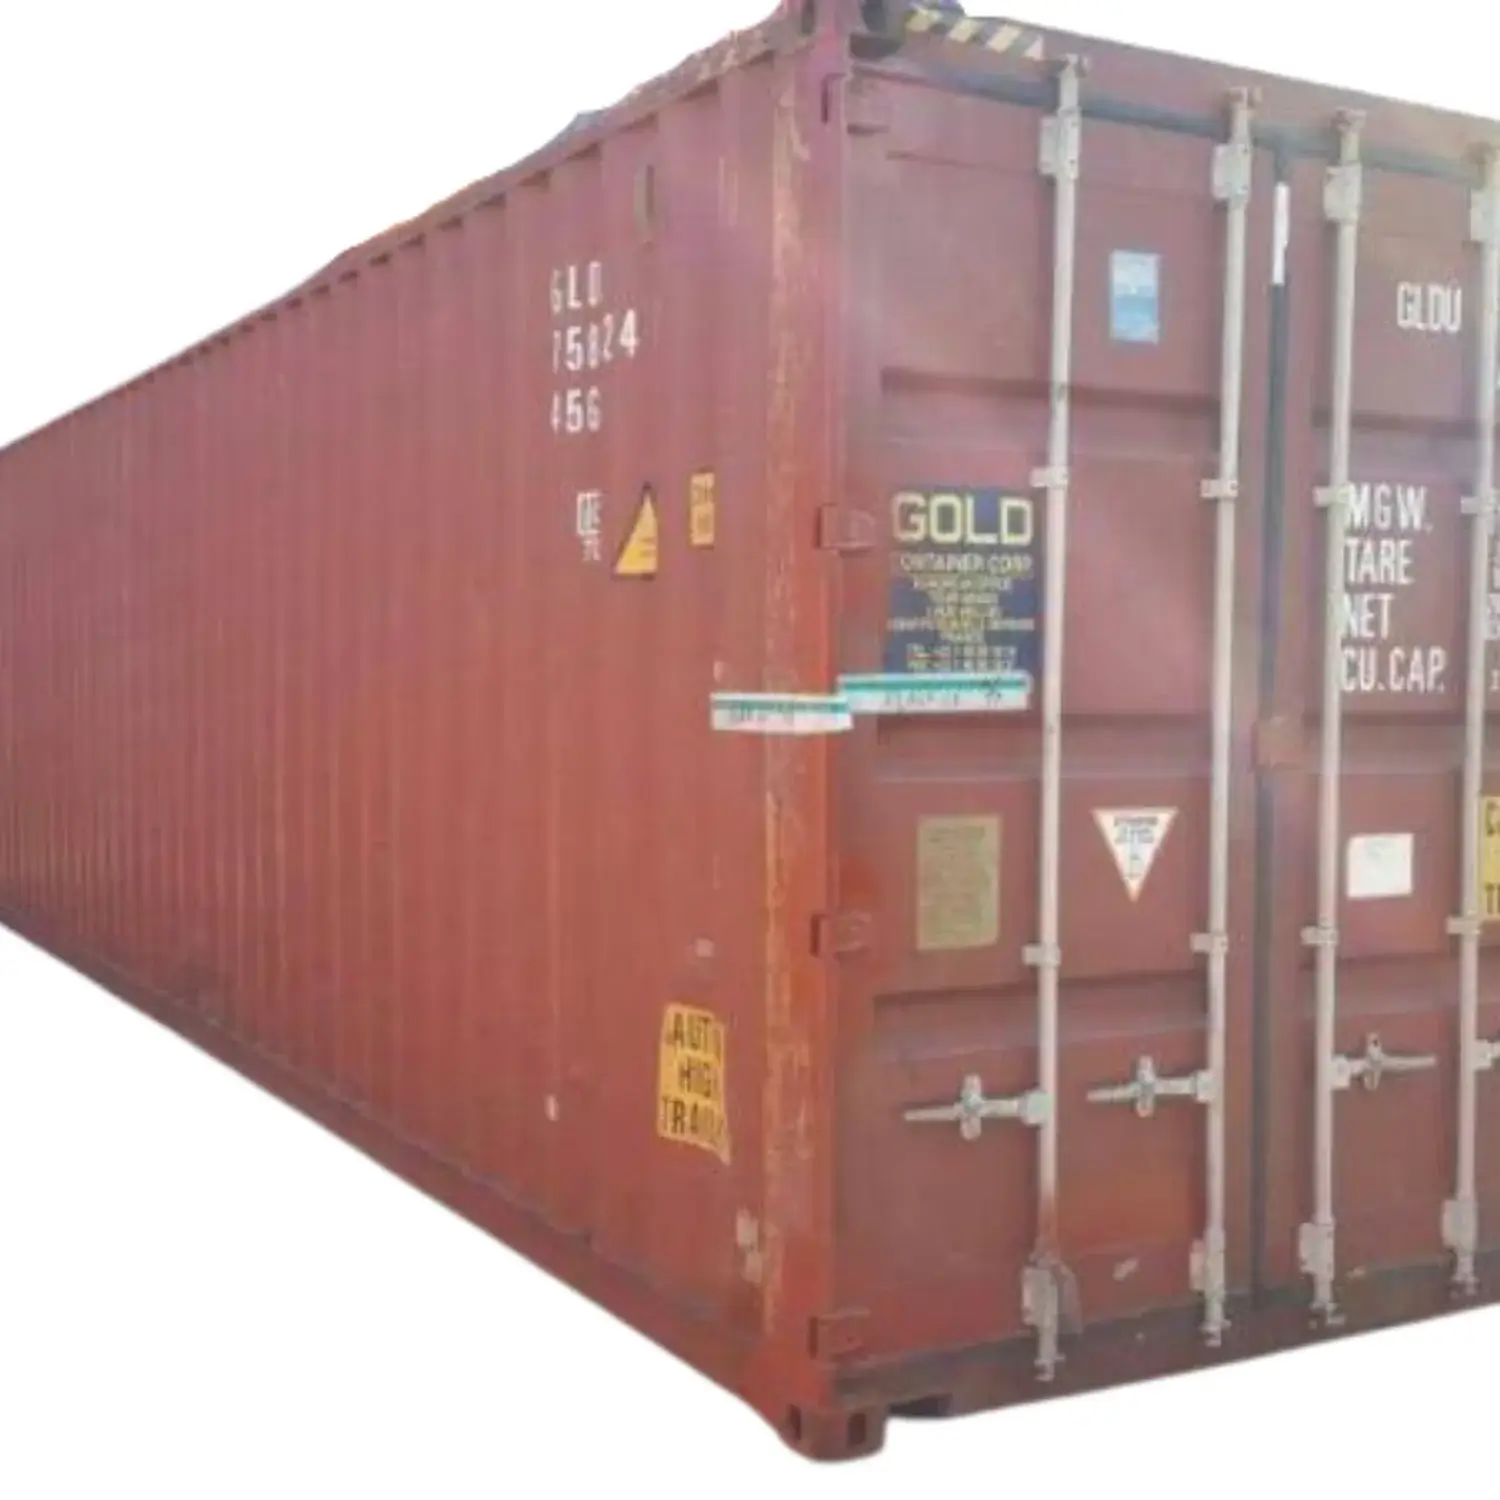 https://onsite-cdn.sfo3.cdn.digitaloceanspaces.com/wp-content/uploads/2022/02/31073709/used-40ft-shipping-container-for-sale-near-me.webp